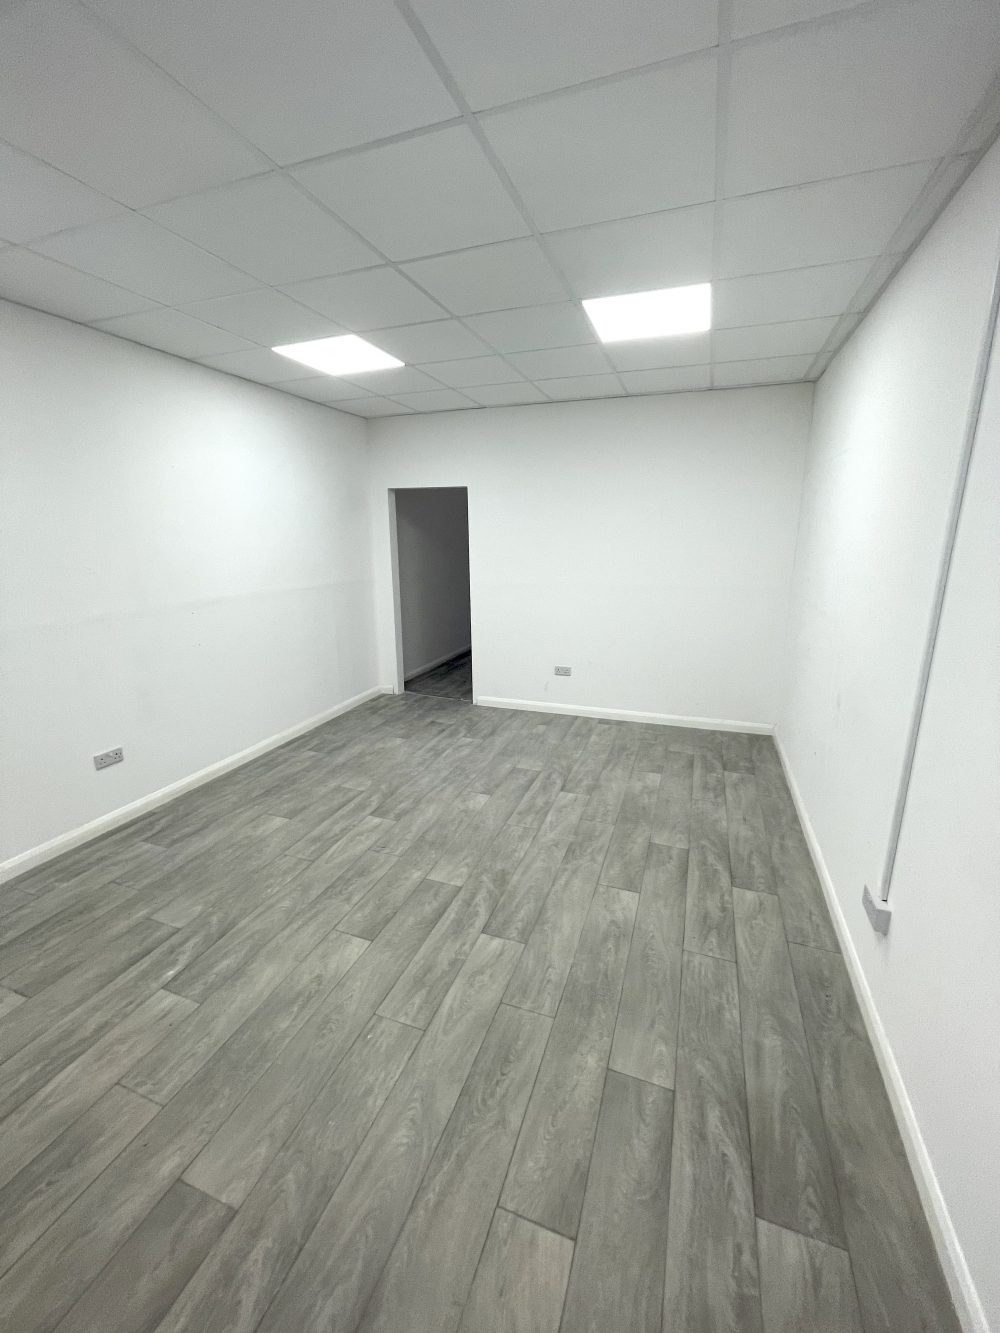 First floor office space : light idustrial creative artist studio to rent in E18 S South Woodford Pic 20